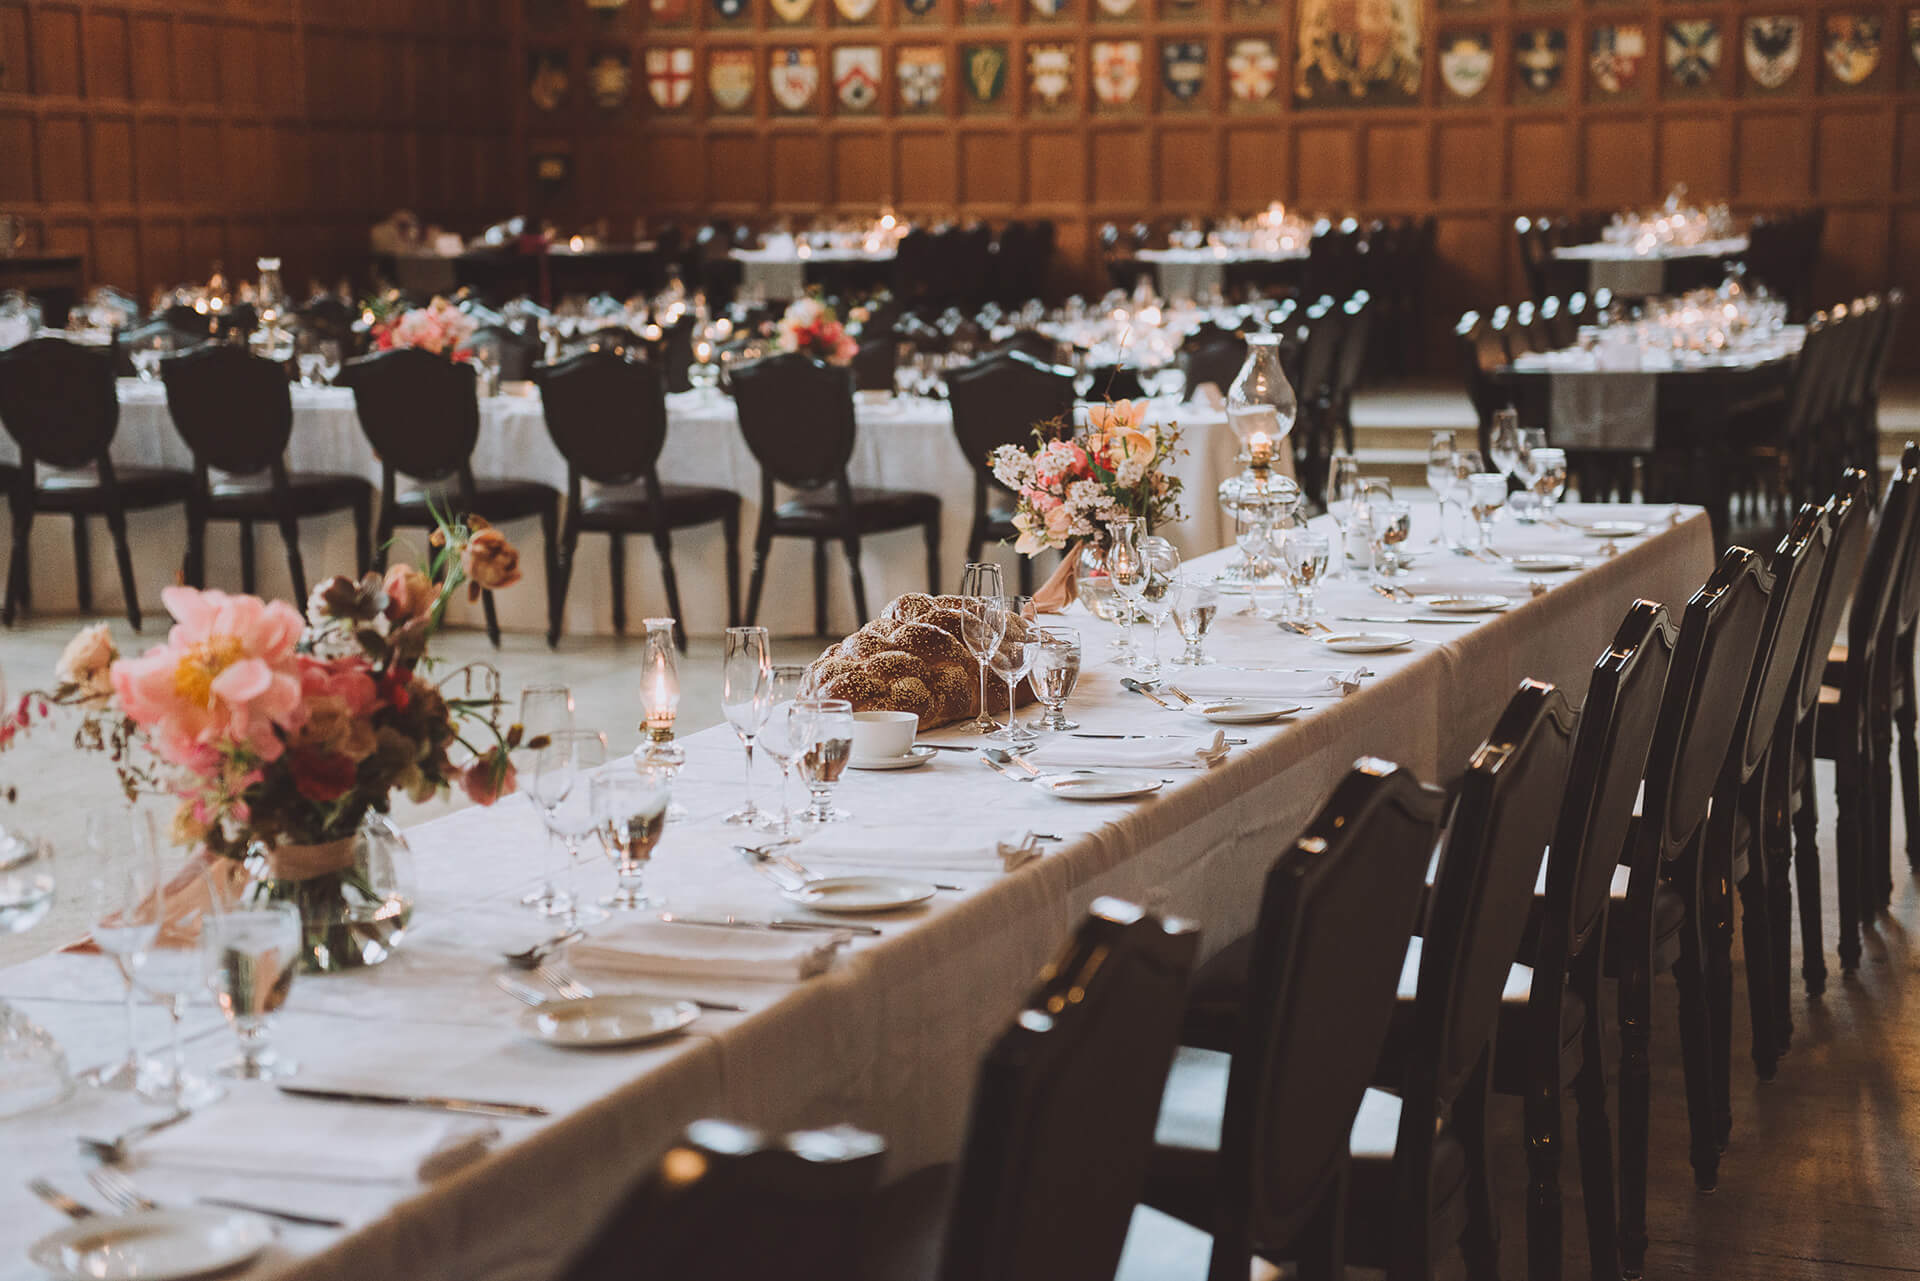 Great Hall tables, arranged for a formal dinner with flowers